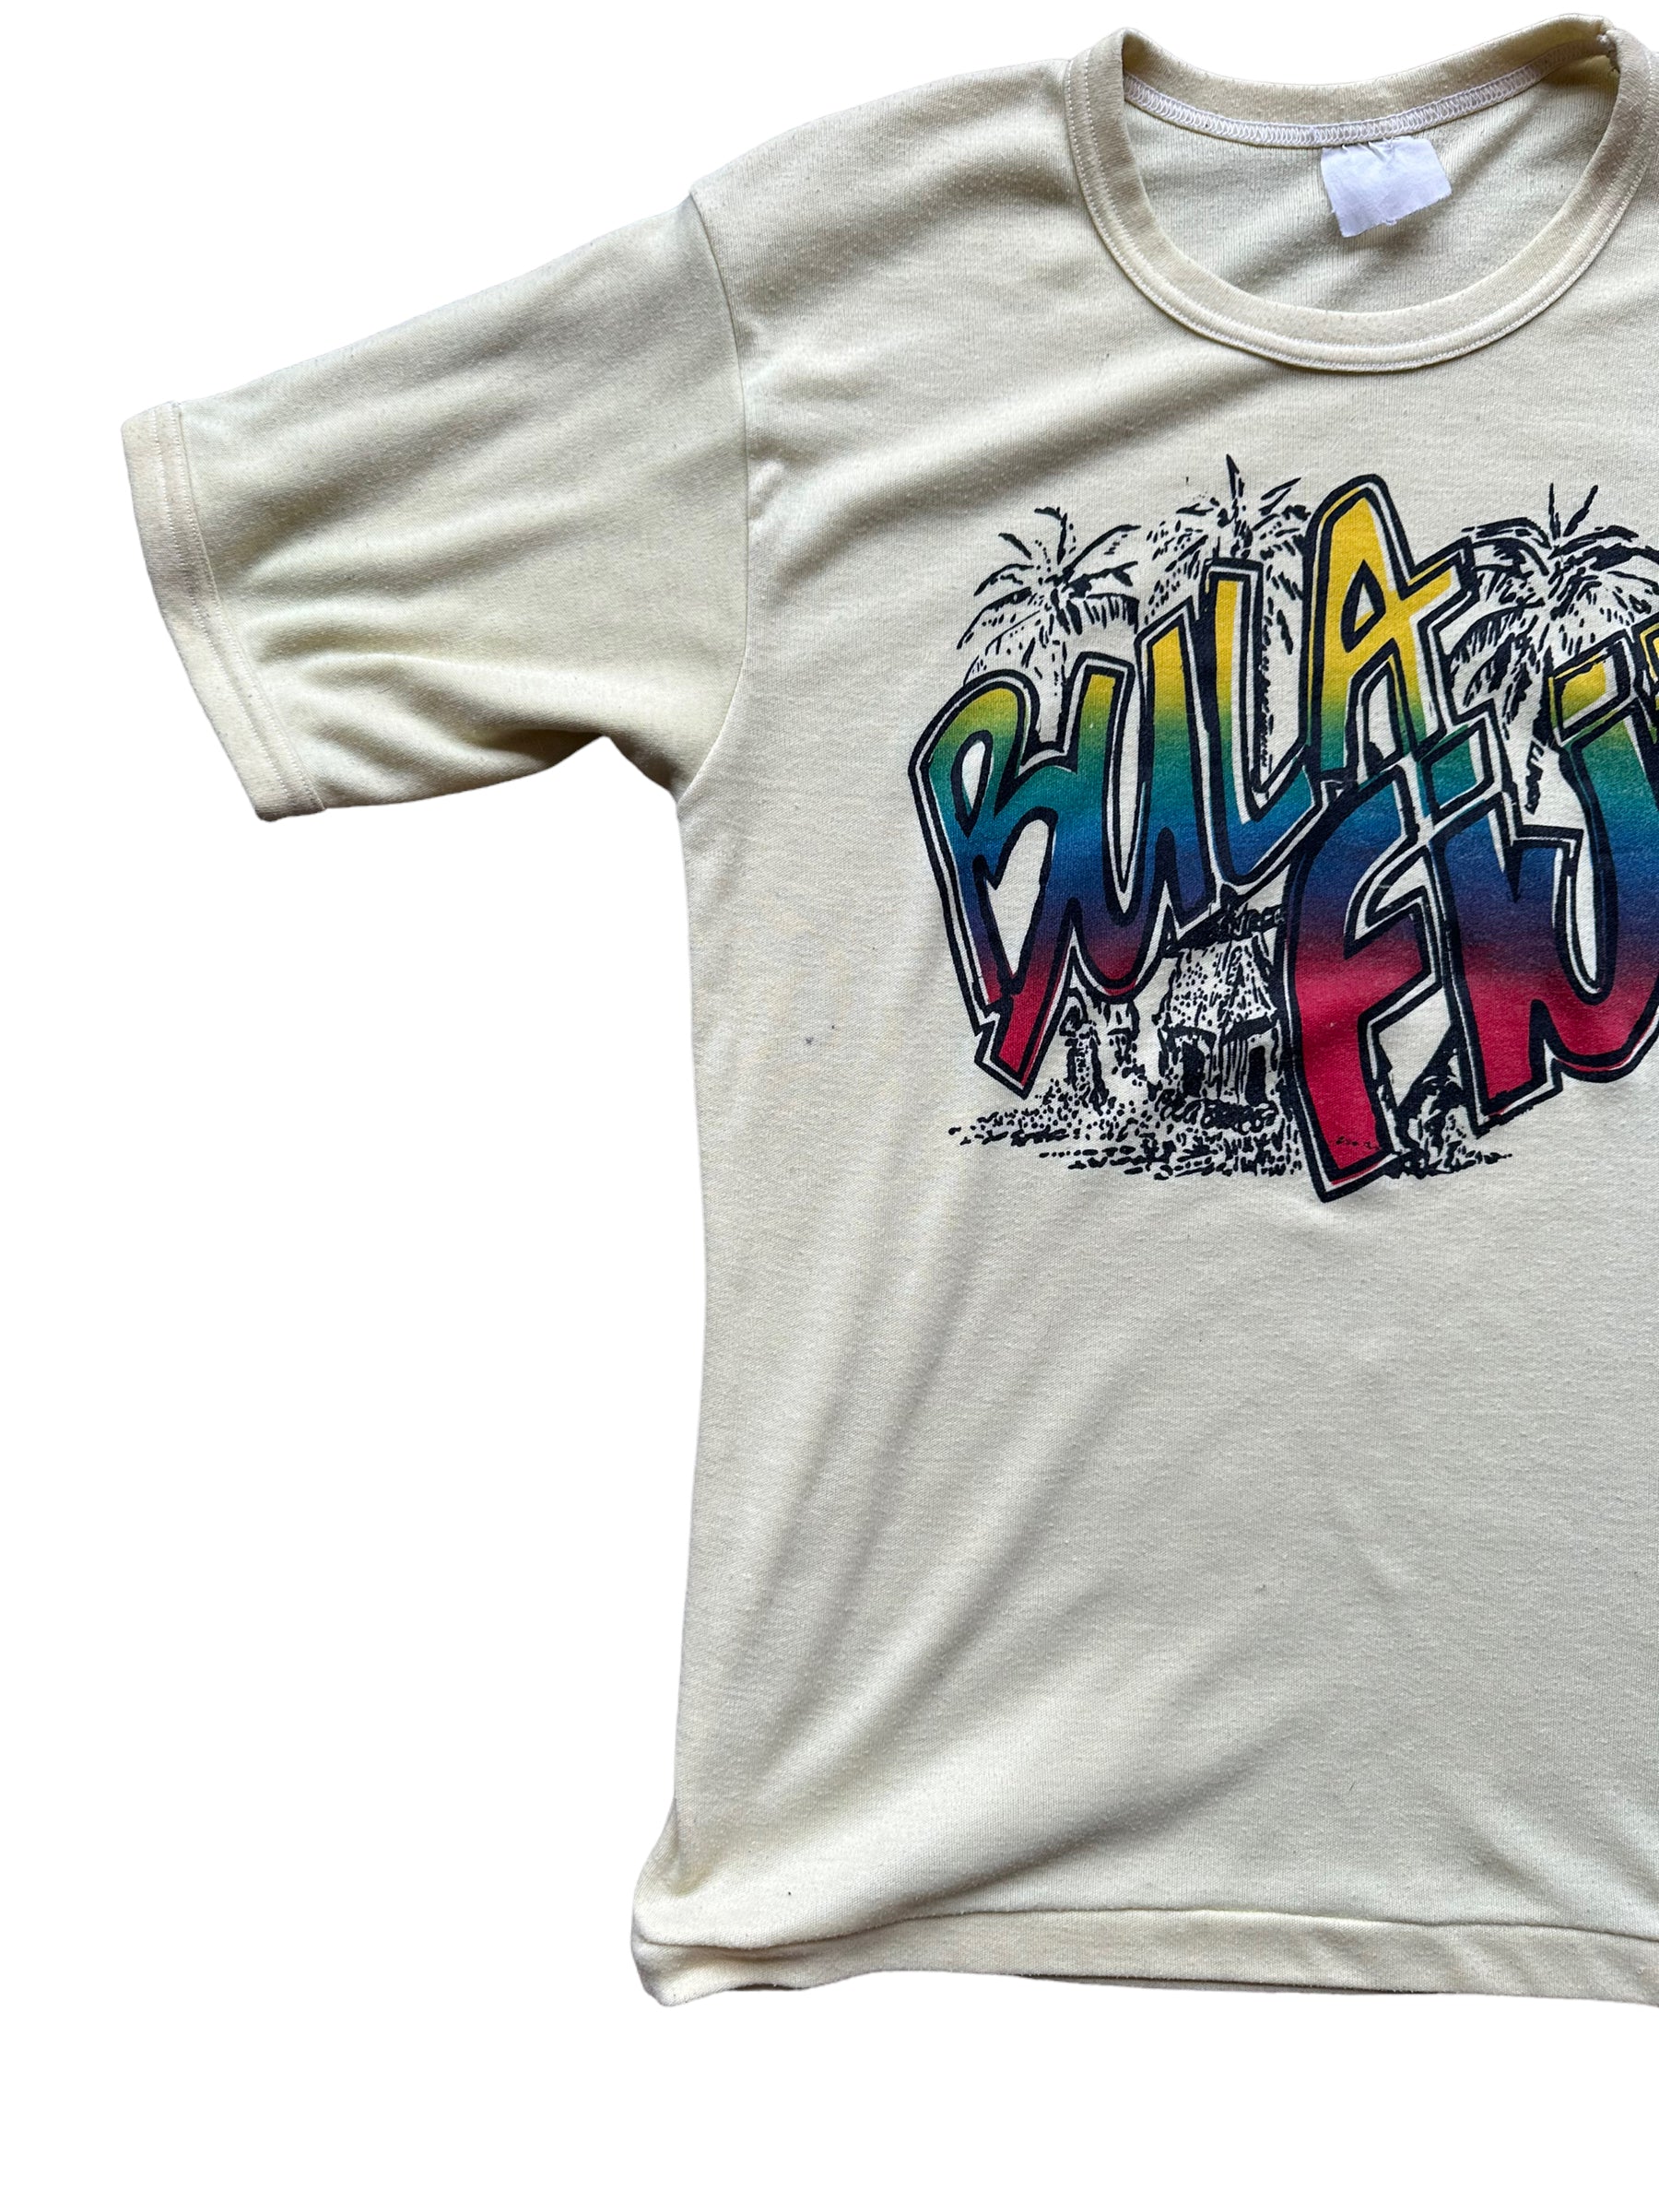 Front Right View of Vintage Bula Fiji Yellow Graphic Tee SZ L | Vintage T-Shirts Seattle | Barn Owl Vintage Tees Seattle